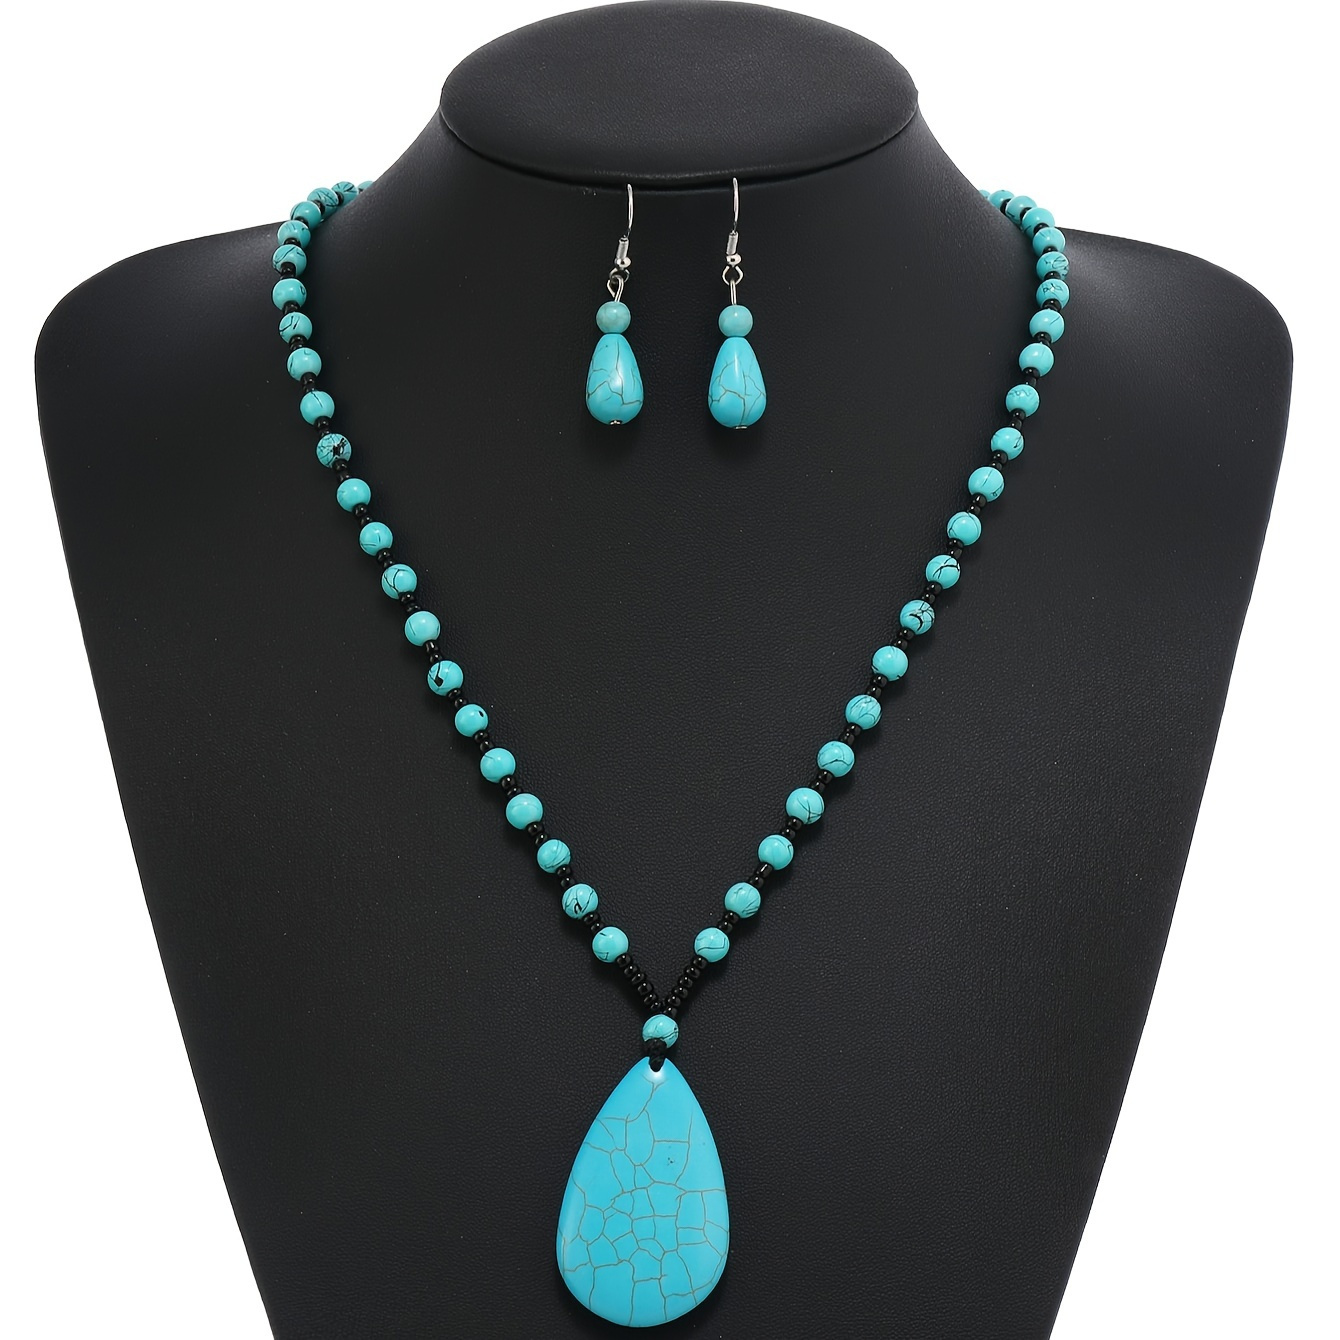 

Bohemian Ethnic Style Jewelry Set Waterdrop Shaped Pendant Necklace And Earrings Set, Retro Beaded Faux Turquoise Artificial Gemstone Jewelry Set For Vacation Wearing